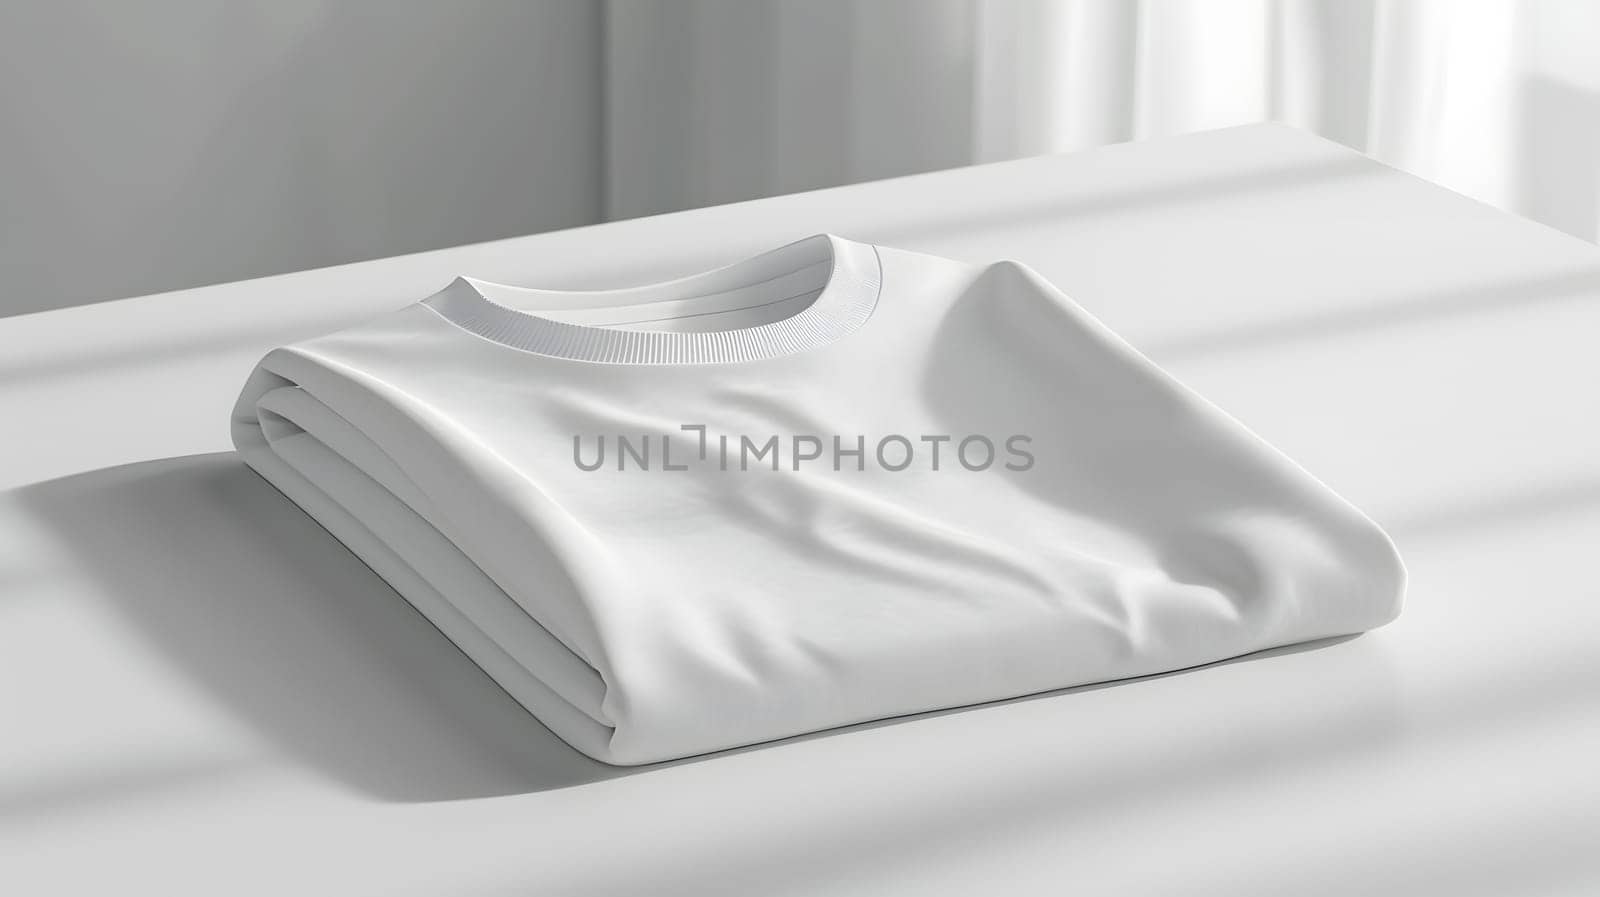 Comfortable grey tshirt folded neatly on a sleek white table by Nadtochiy